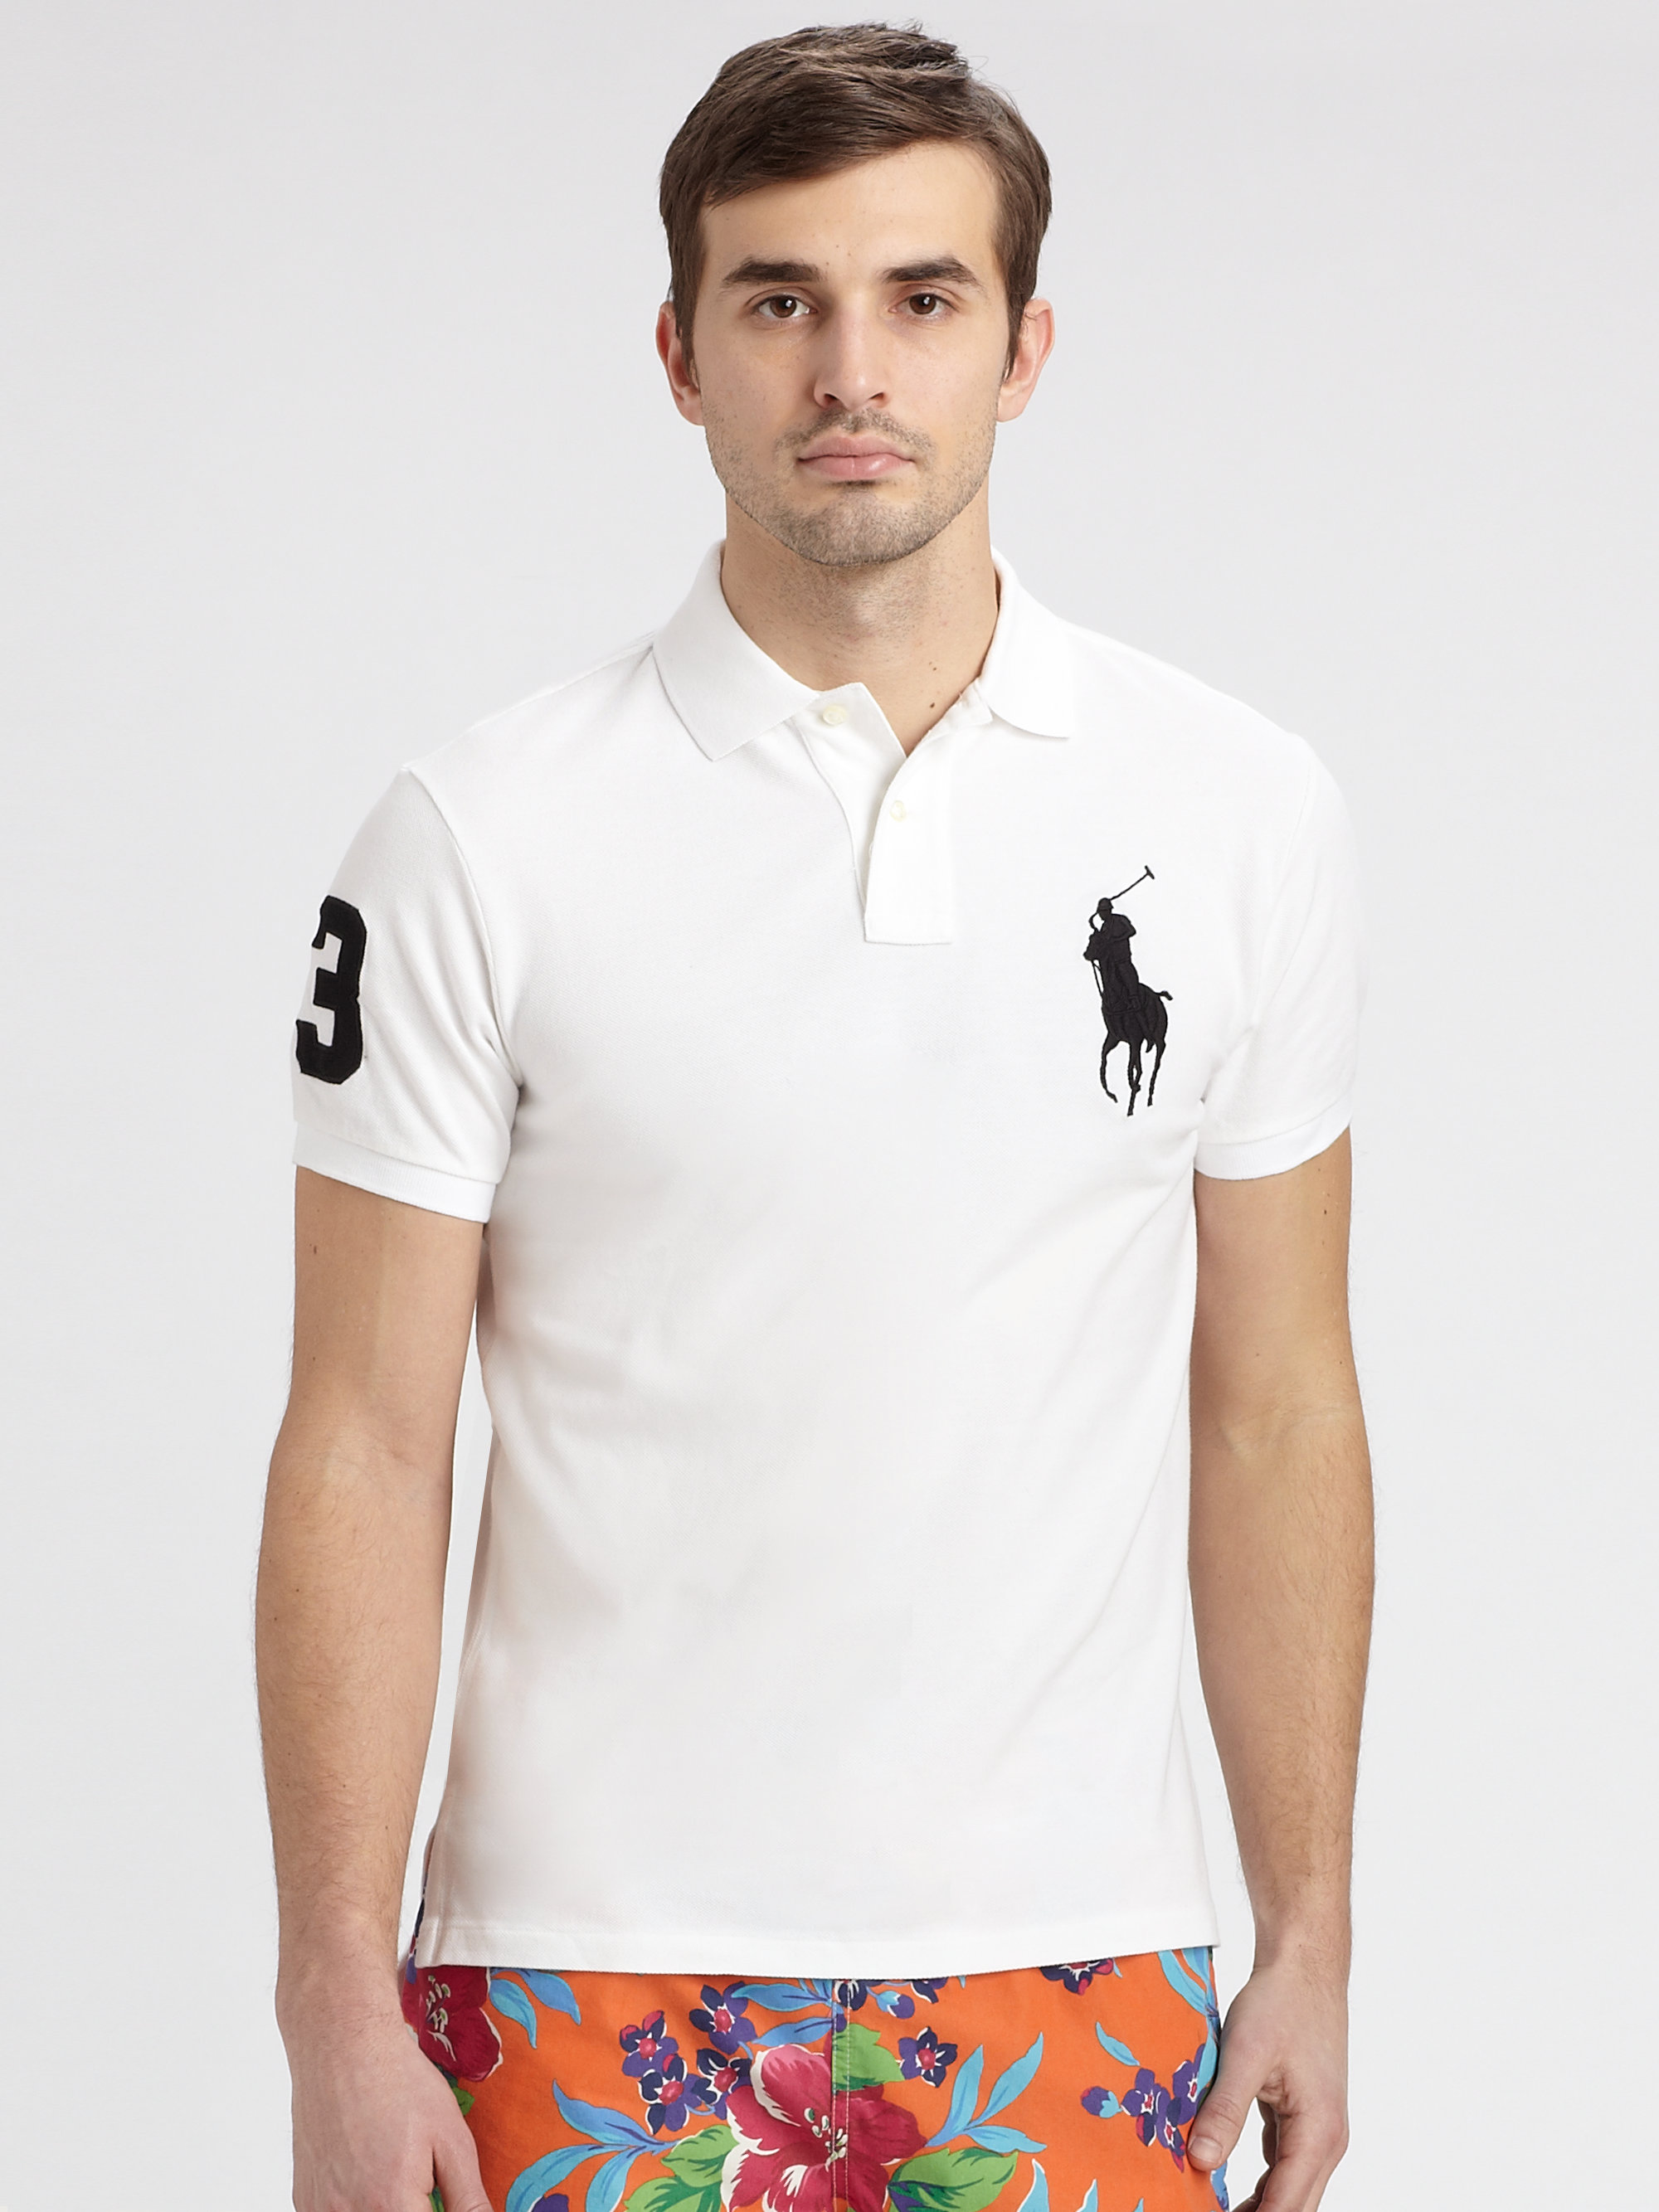 Lyst - Polo Ralph Lauren Pique Big Pony Polo in White for Men